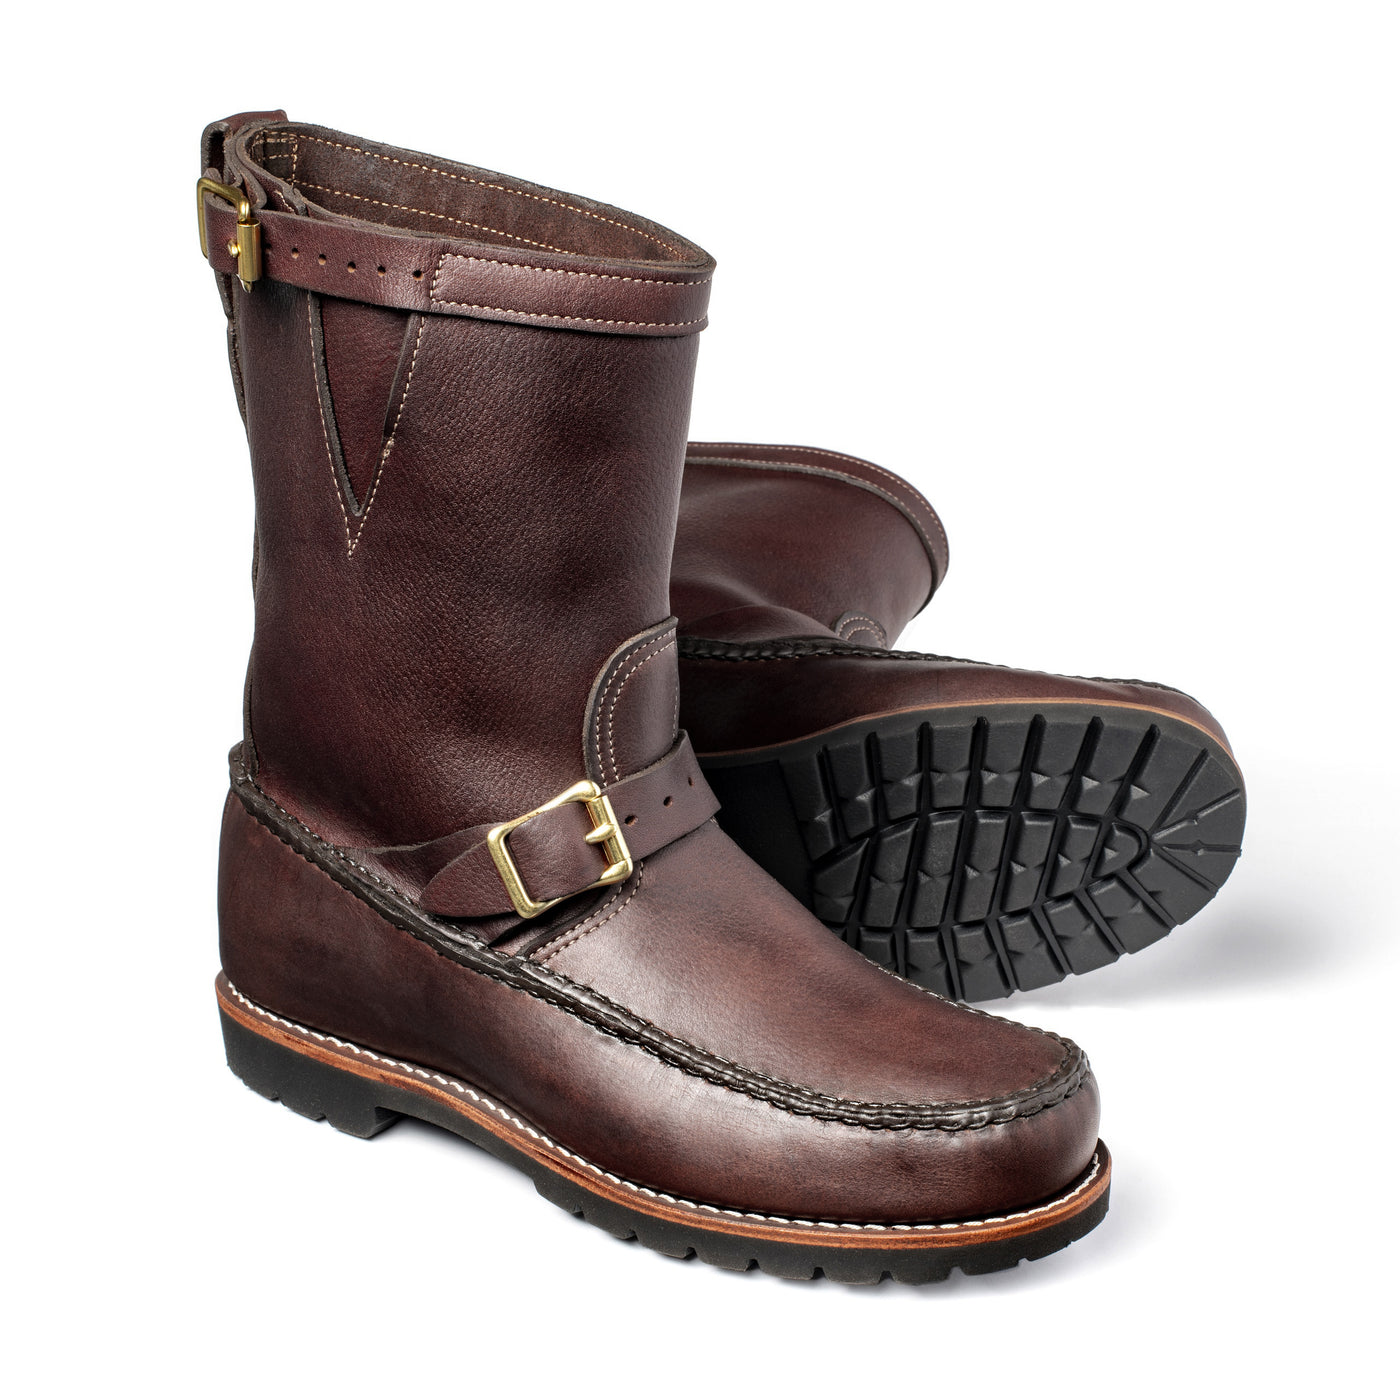 Gokey USA Classic Pull on Boot-Footwear-Brown-8-D-Kevin's Fine Outdoor Gear & Apparel